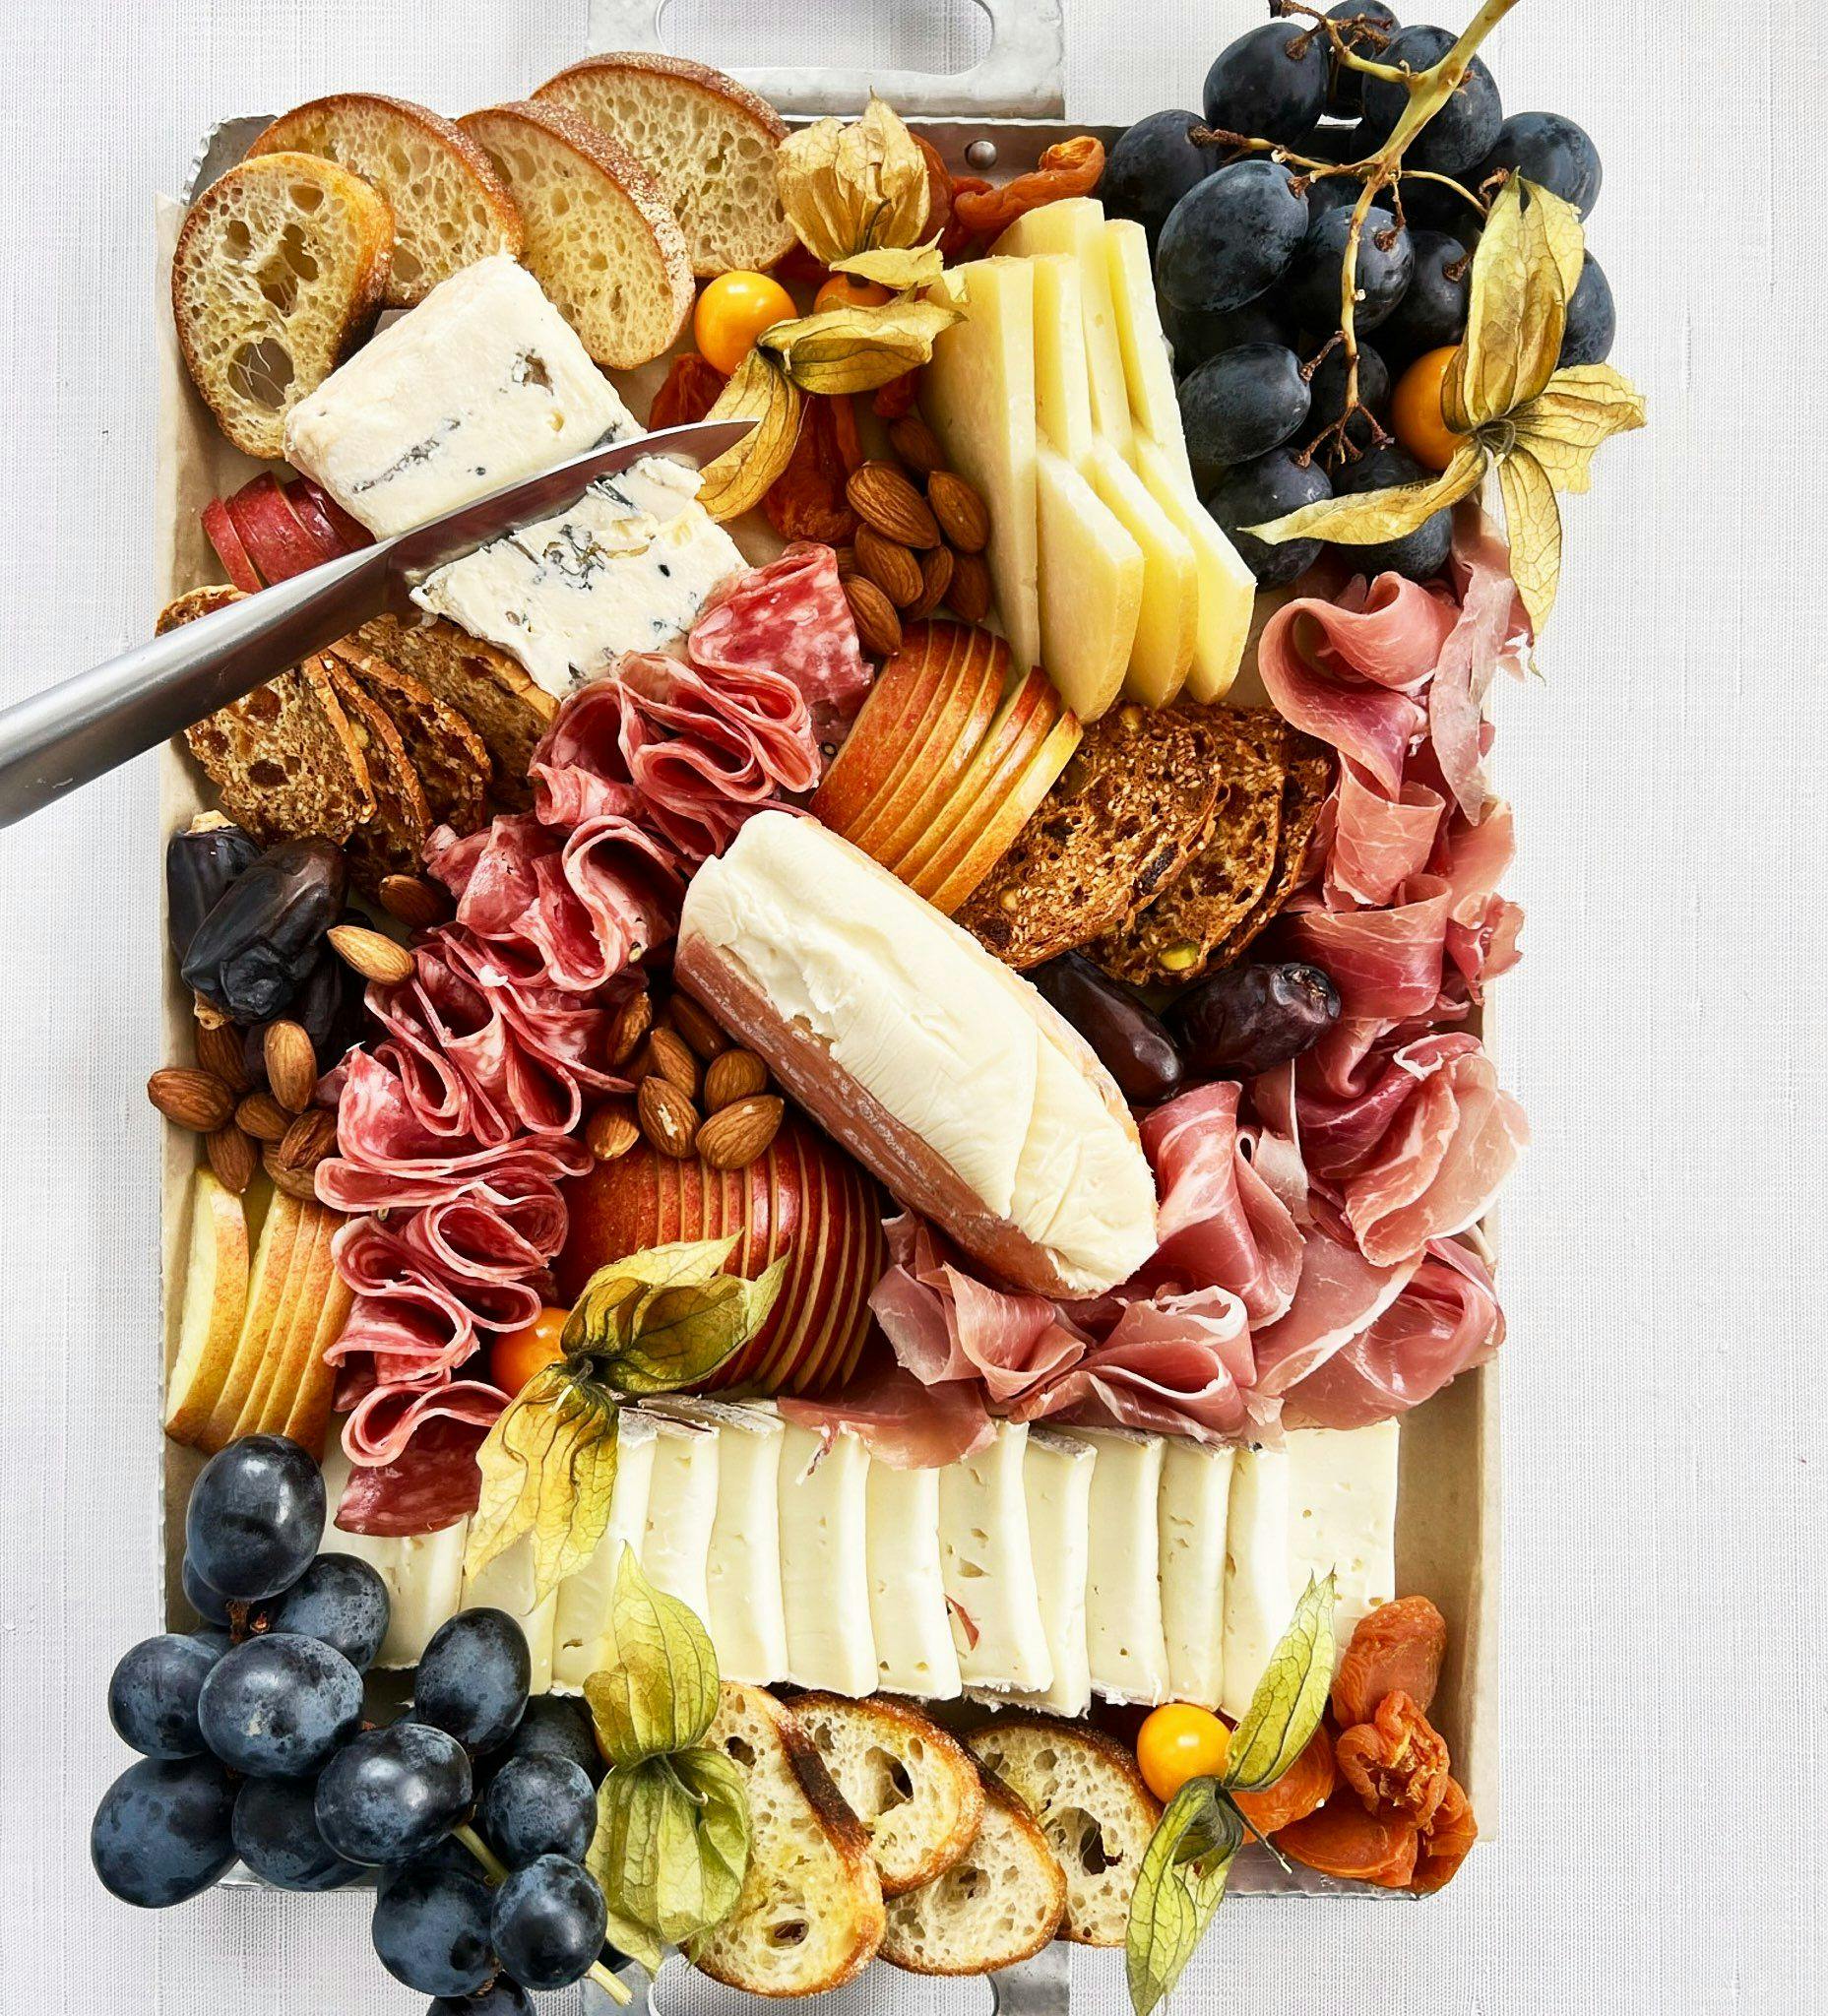 Charcuterie Board with meats, cheeses, grapes, toasts